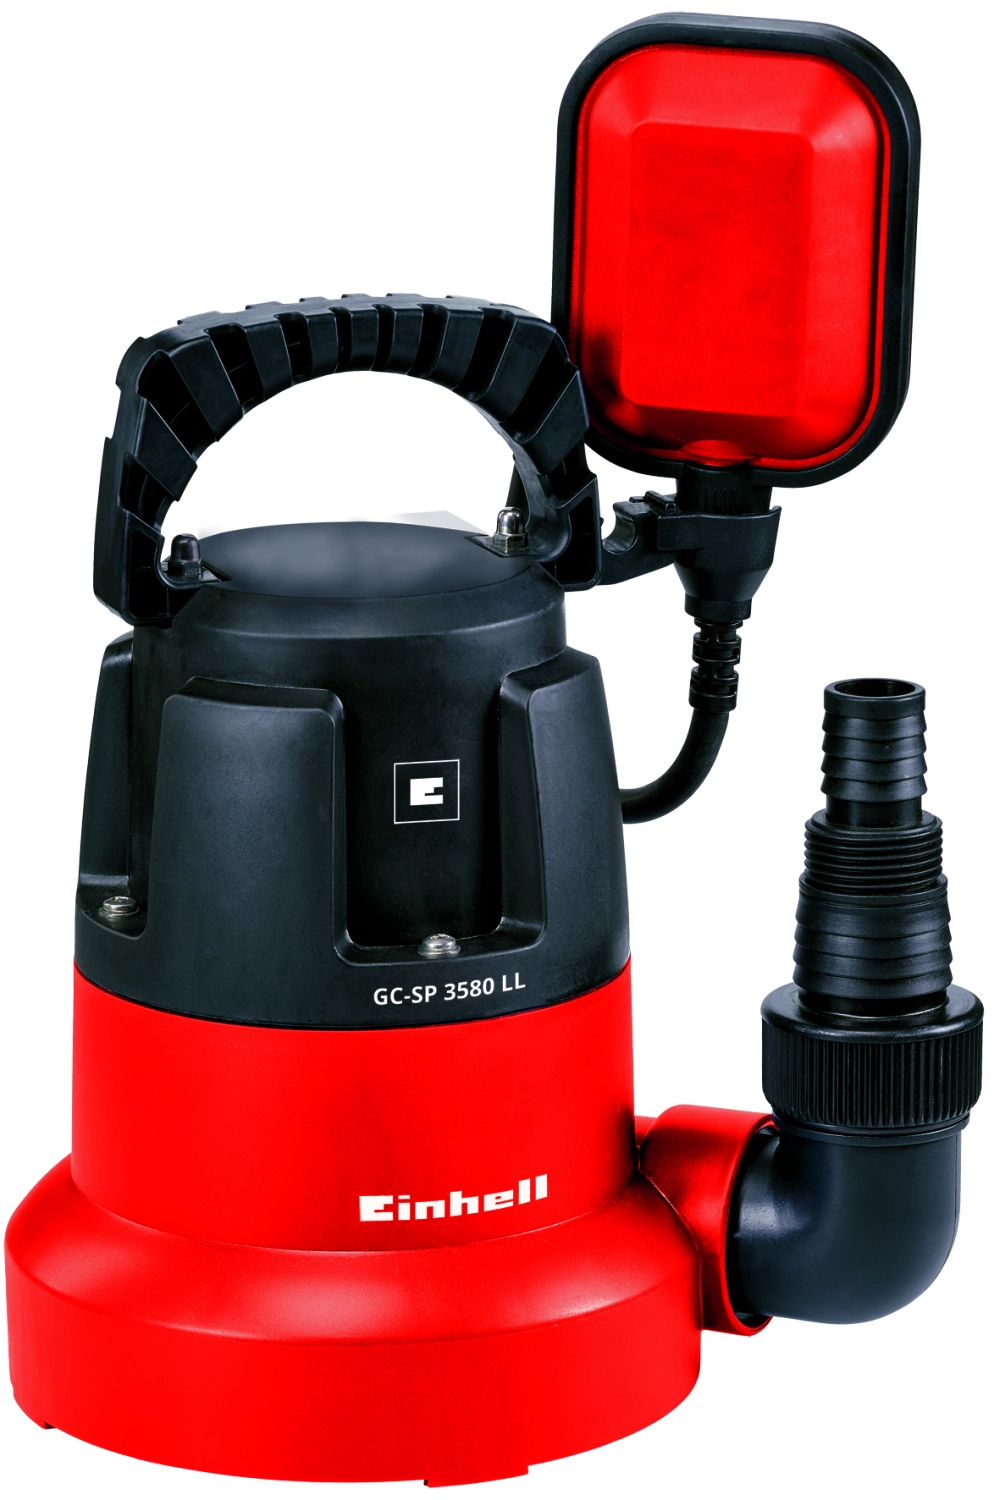 Einhell 4170445 - Pompe submersible GC-SP 3580 LL